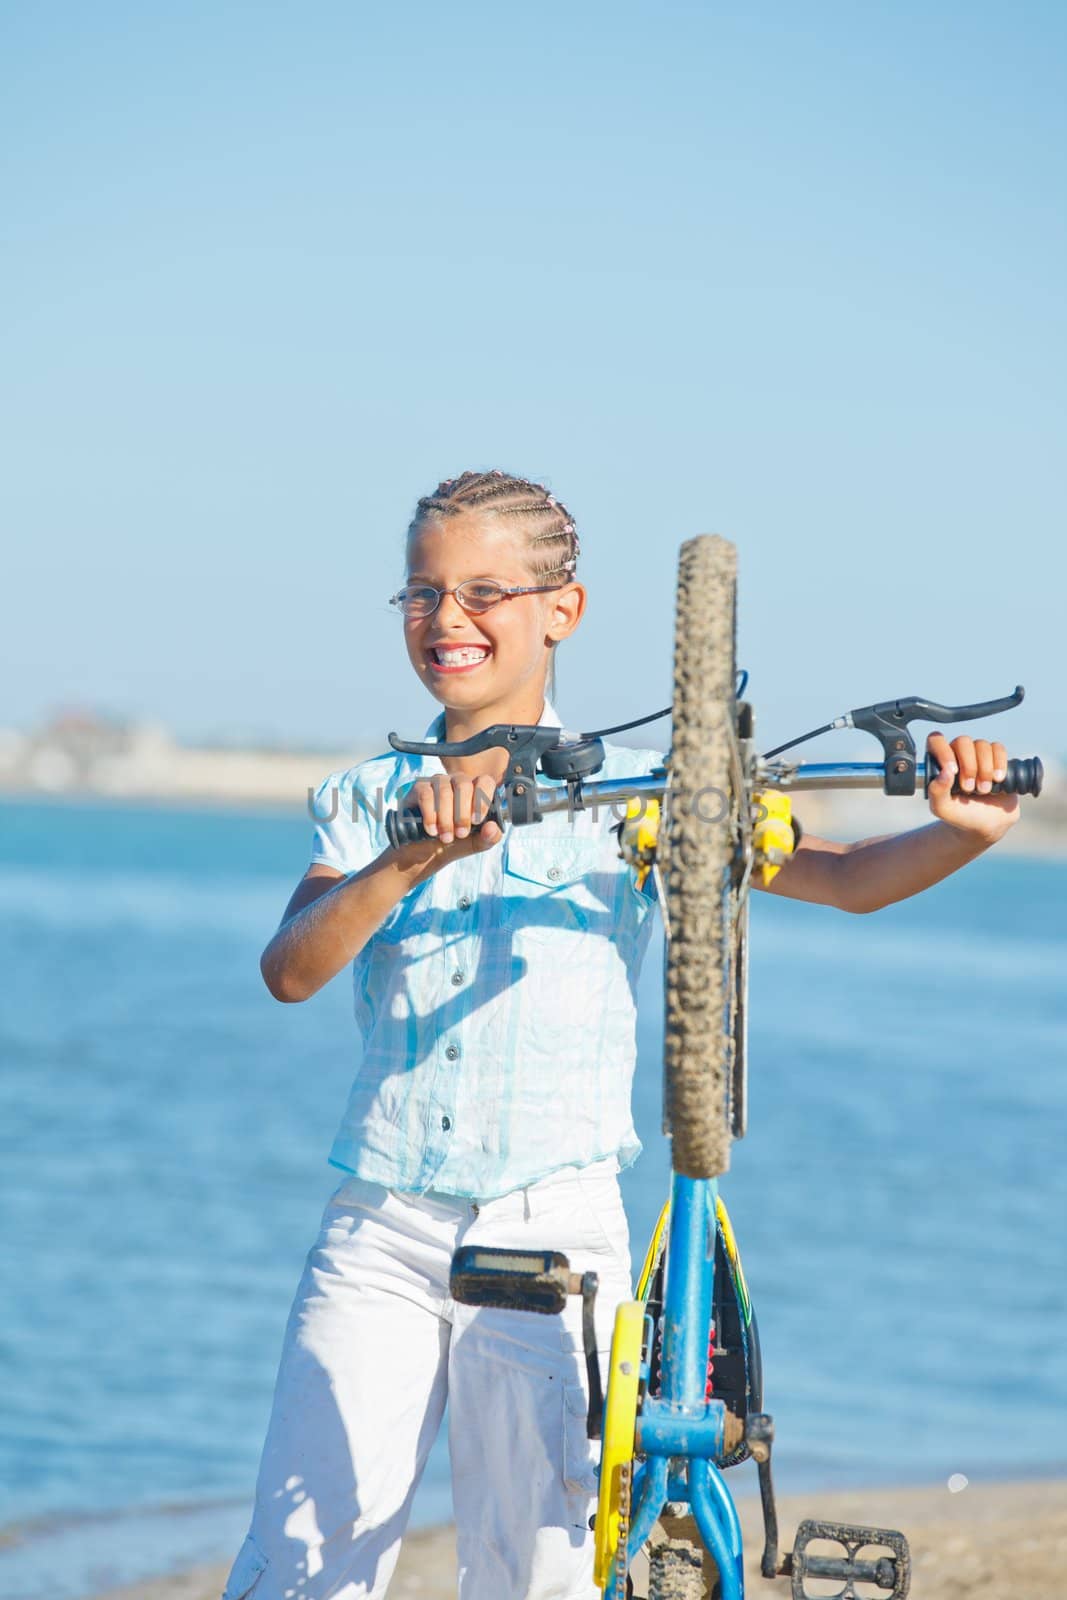 beautiful young girl standing with her bicycle. the background sea